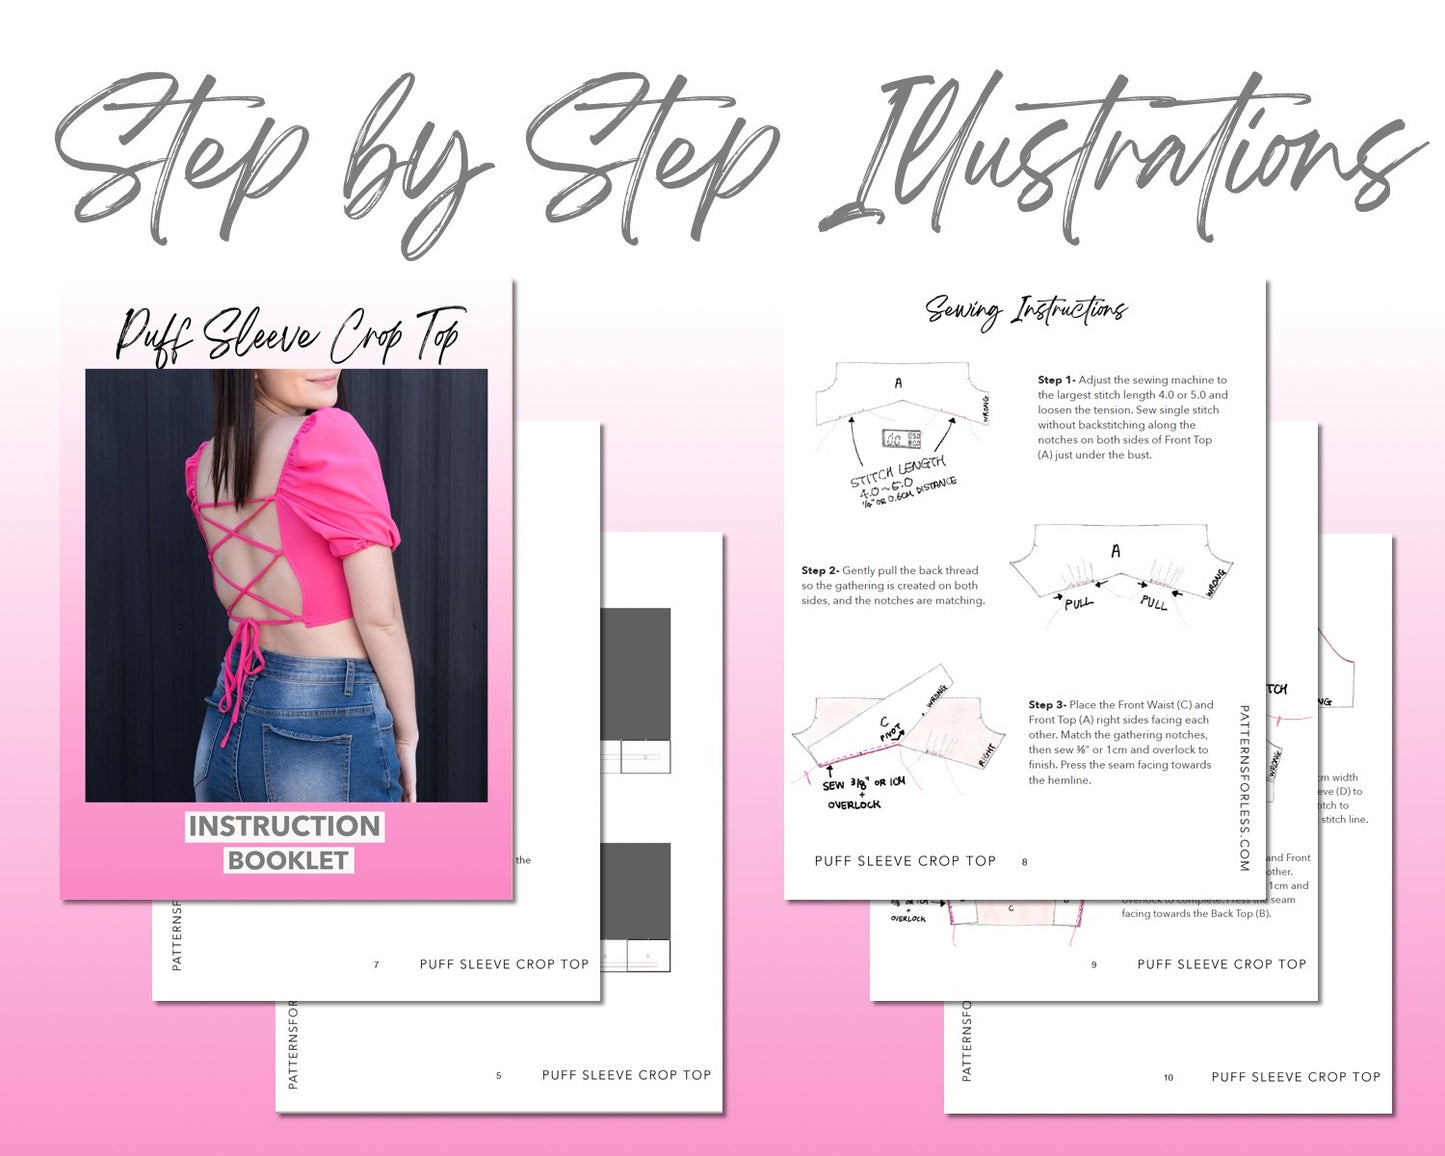 Puff Sleeve Laced Up Back Crop Top sewing pattern step by step illustrations.